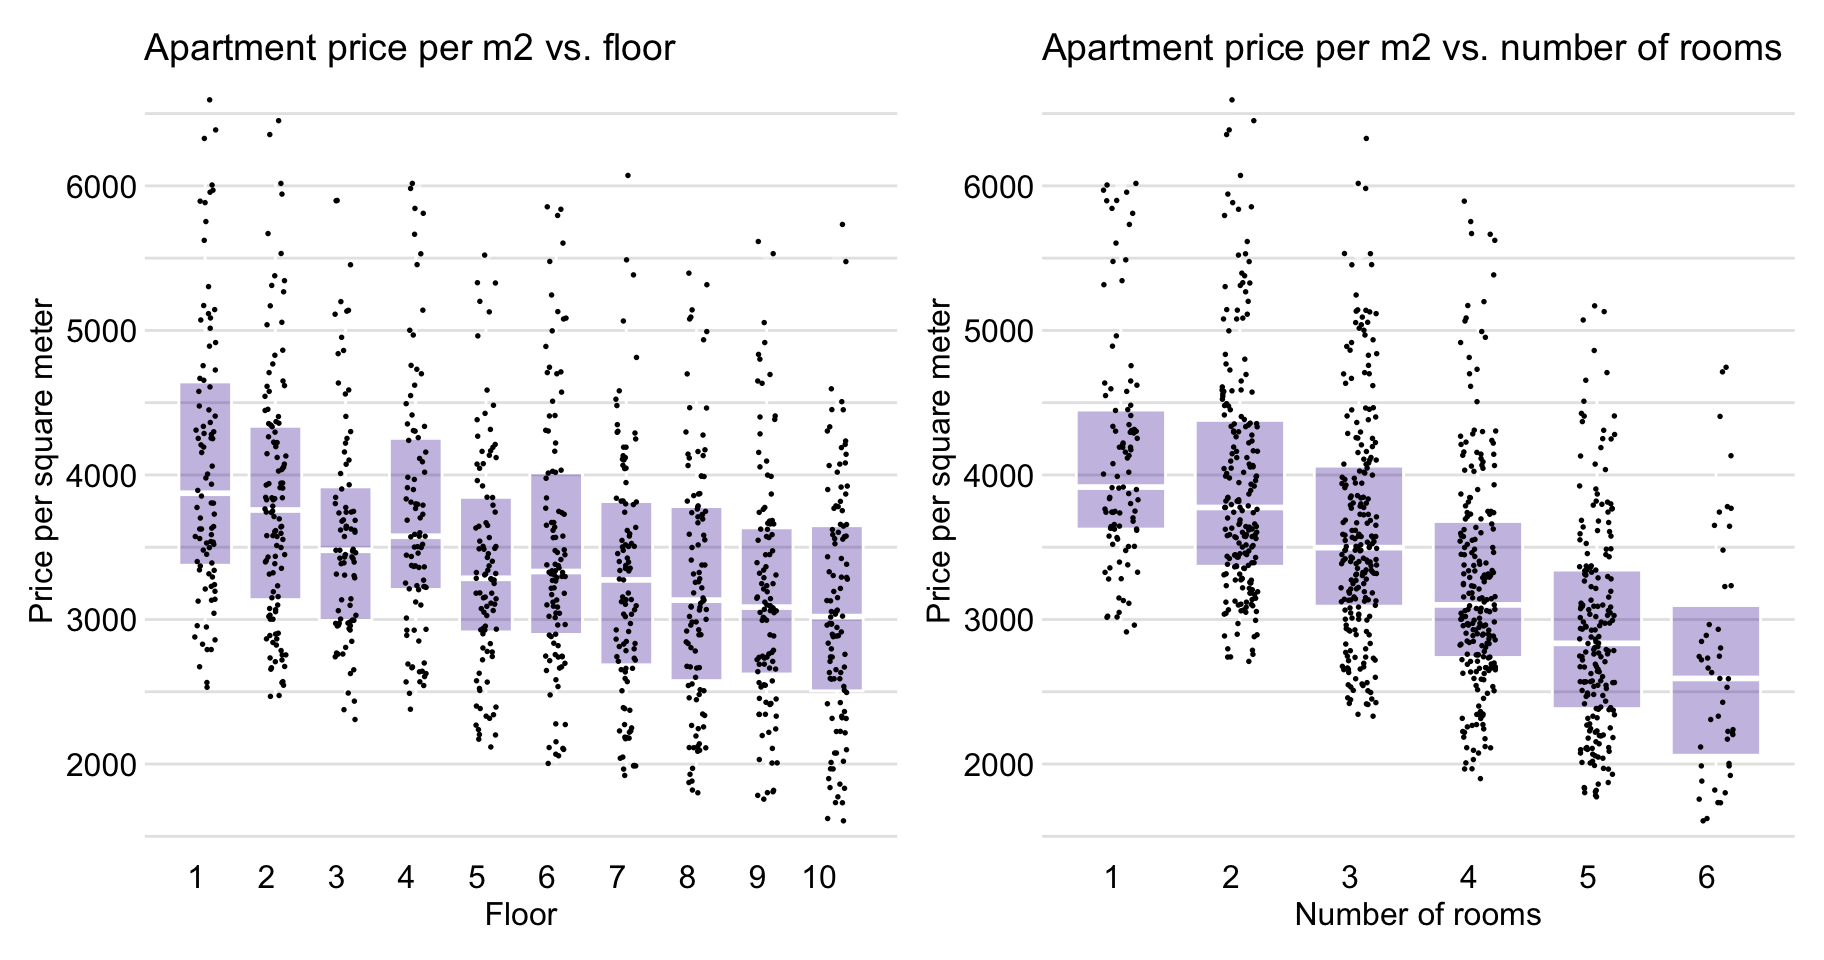 Apartment-prices data. Price per square meter vs. floor (left-hand-side panel) and vs. number of rooms (right-hand-side panel).